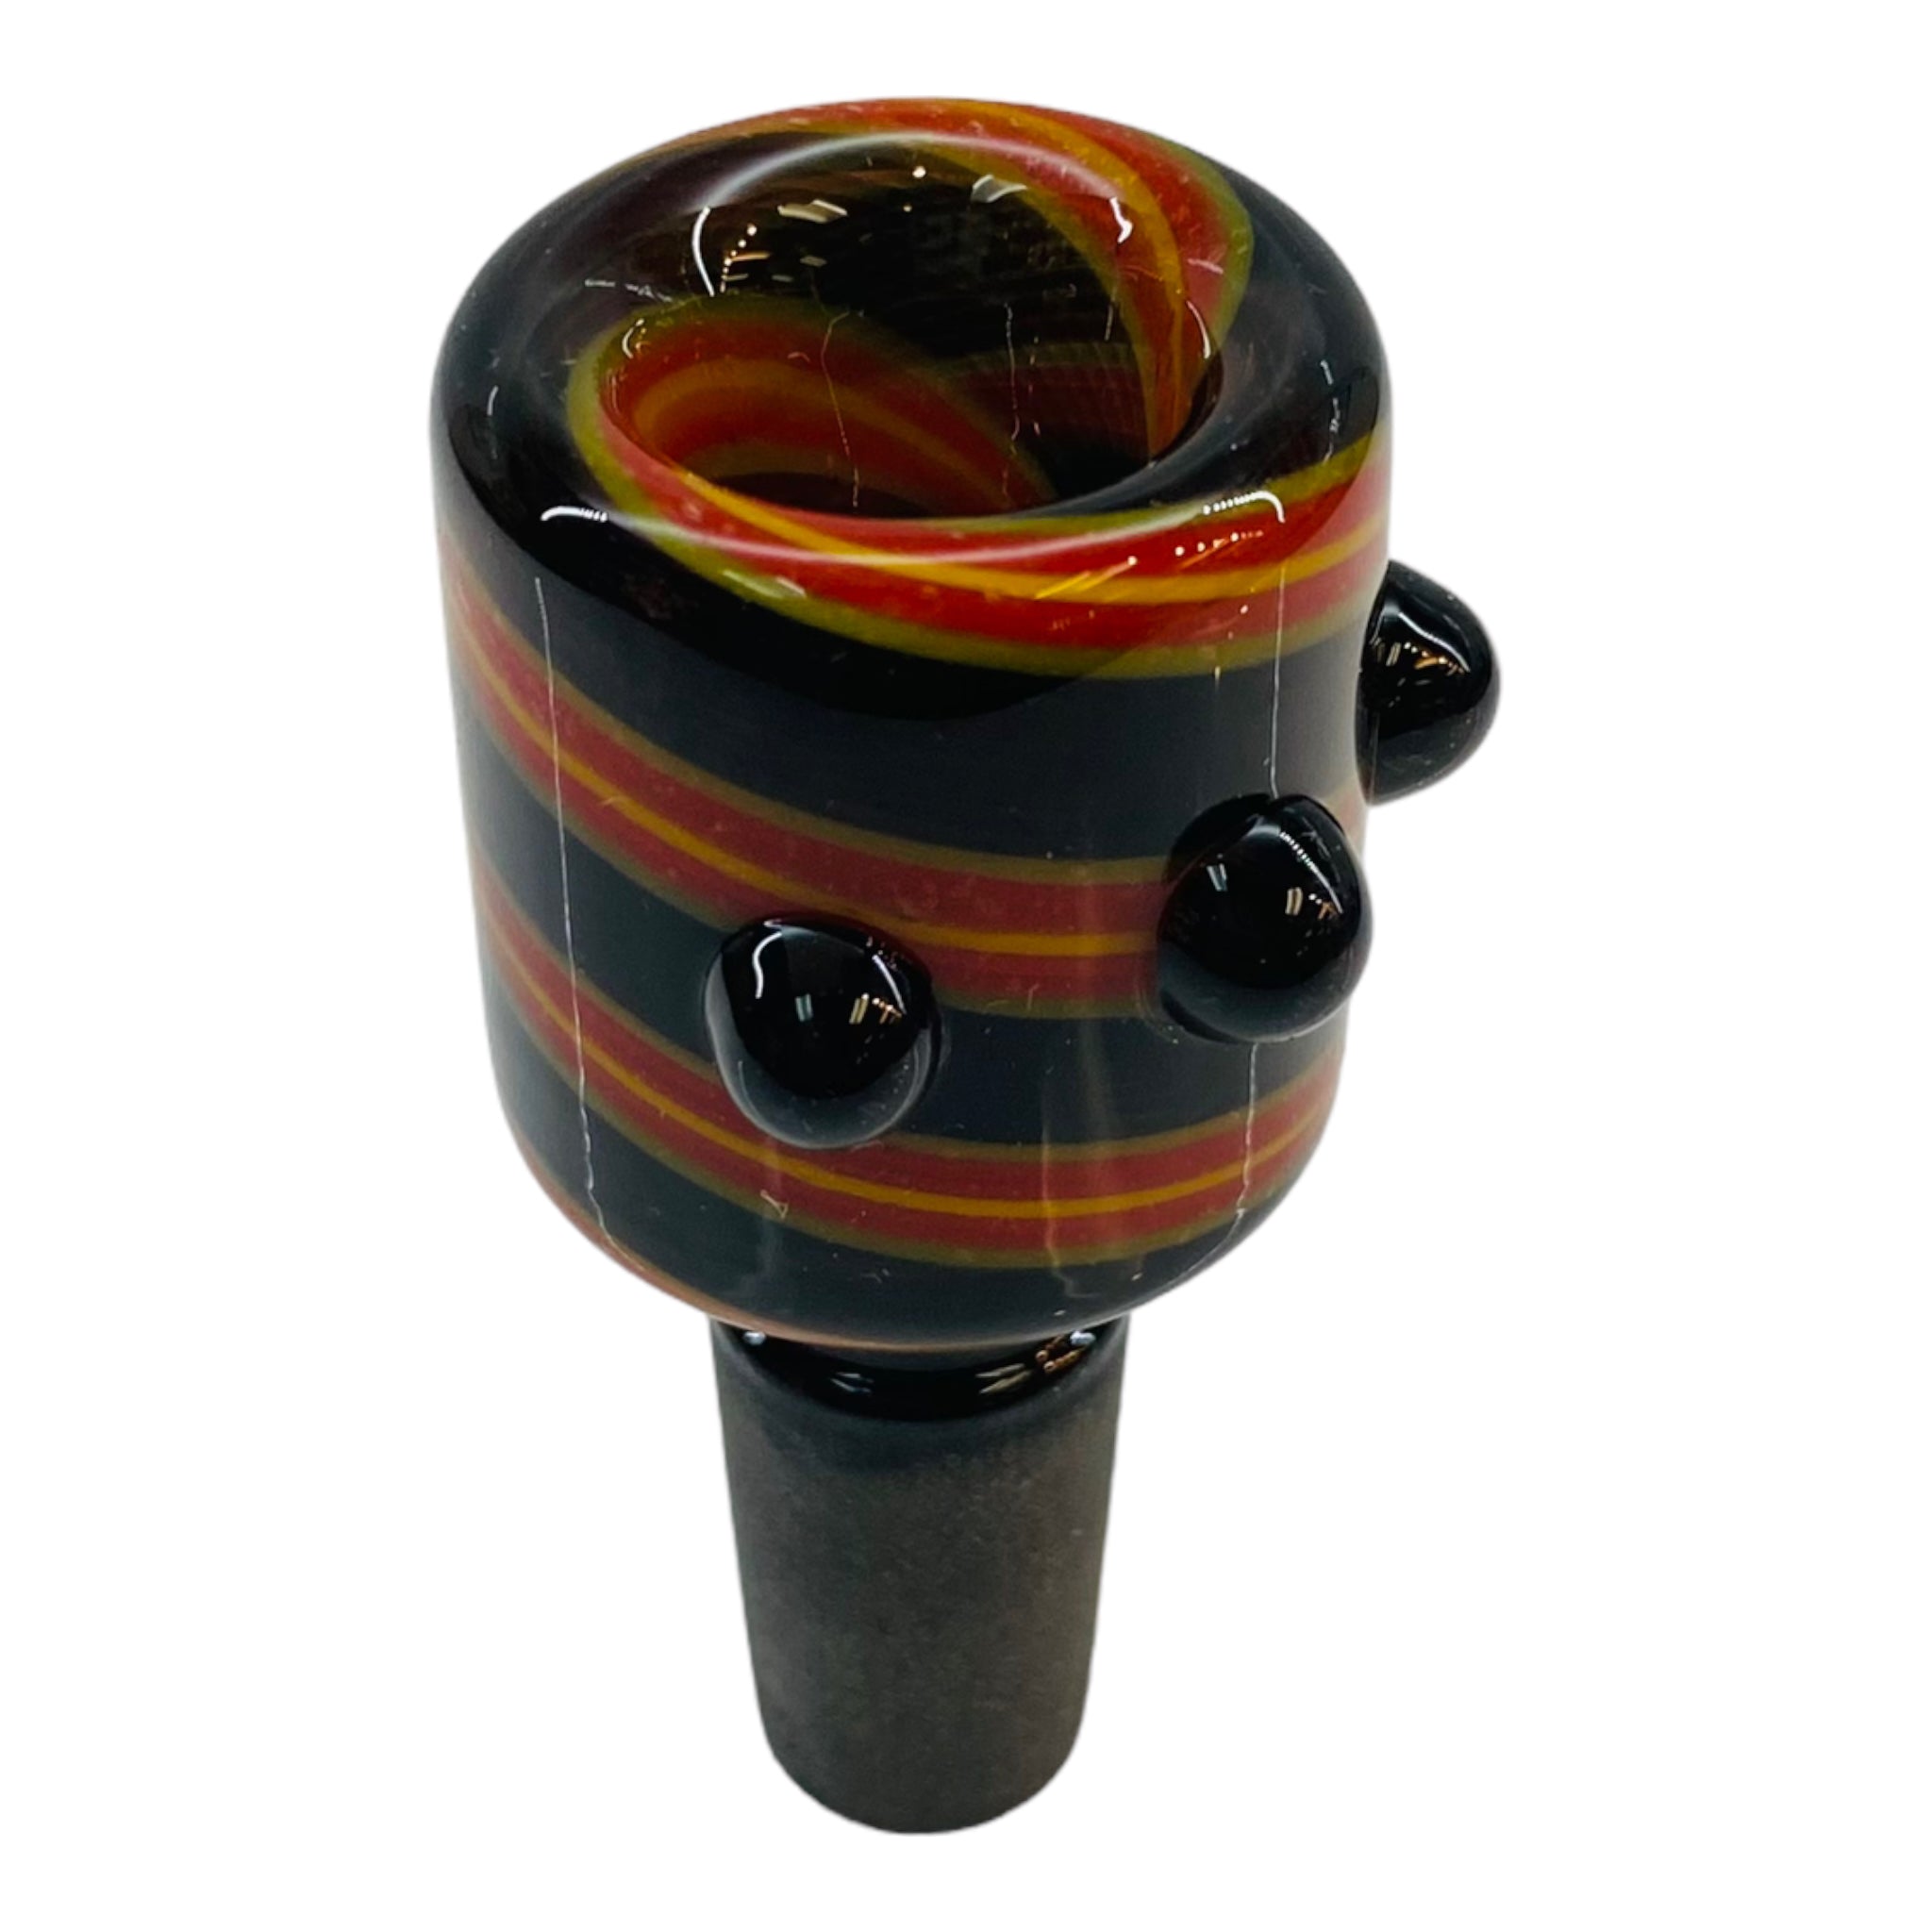 14mm Flower Bowl - Black Fitting With Tall Color Twist Bubble - Rasta And Black